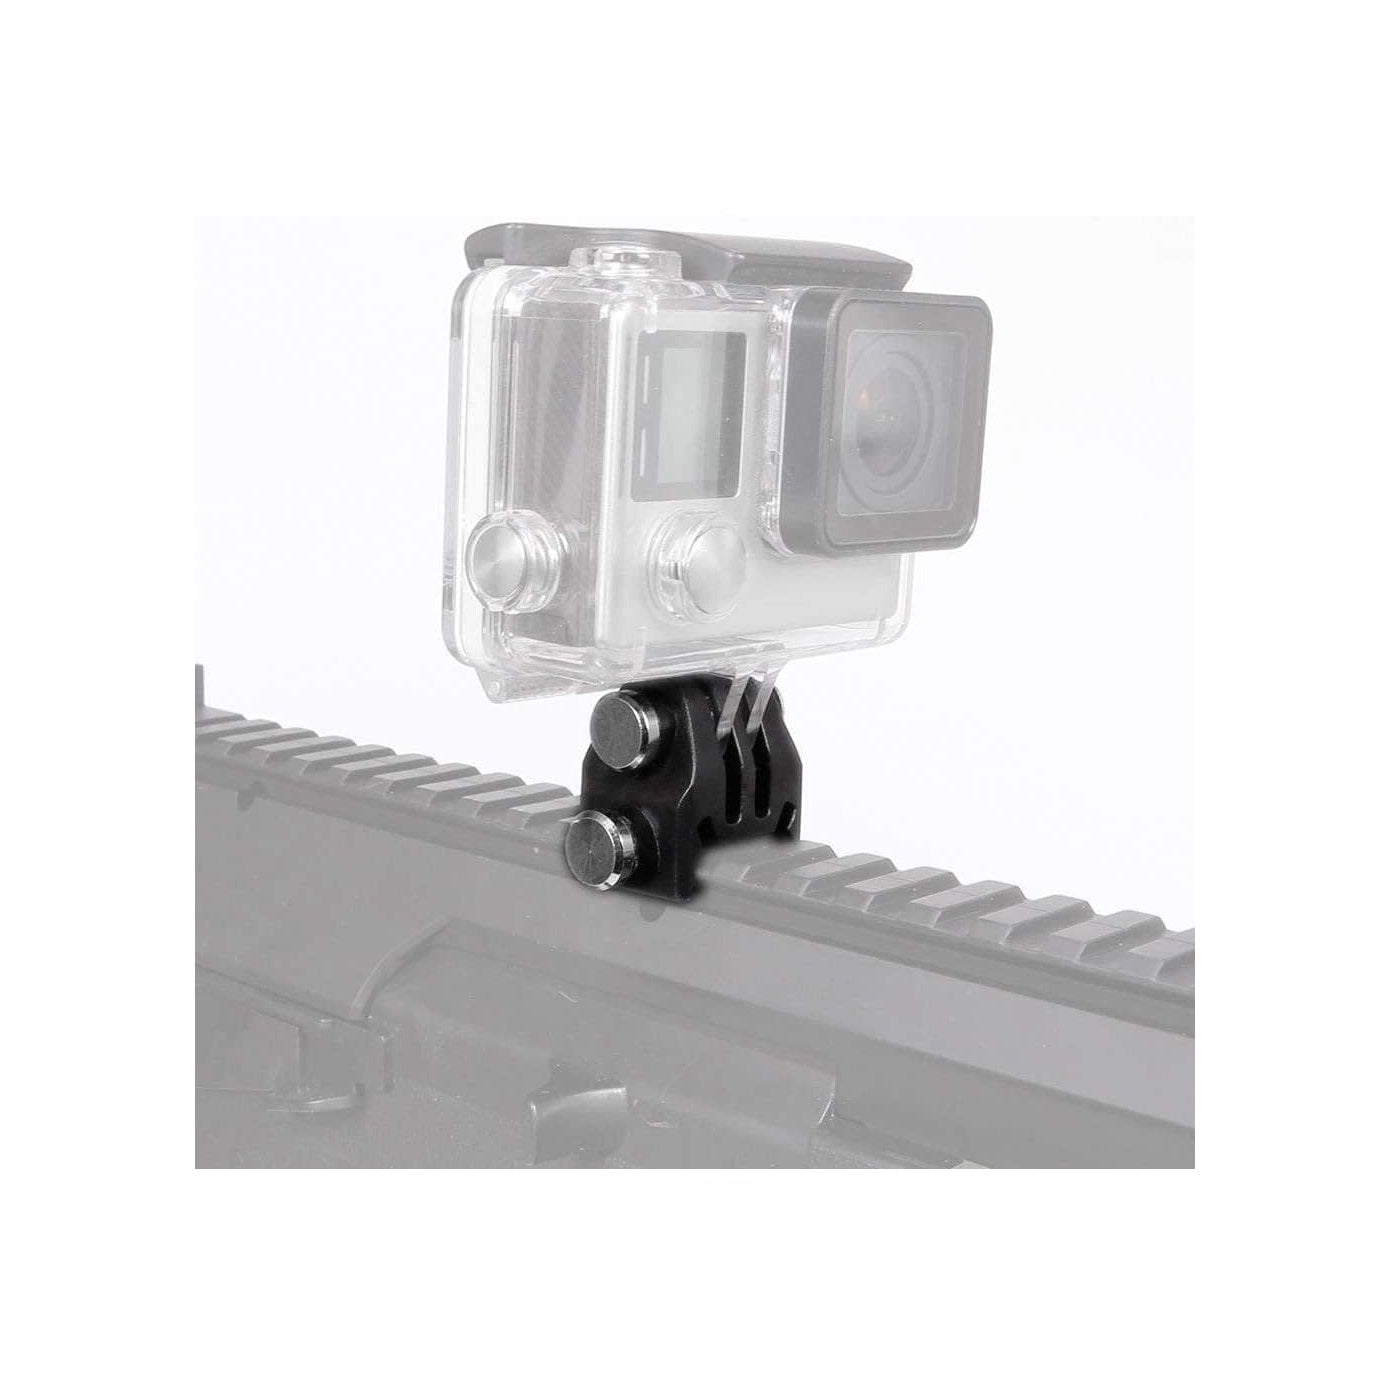 Picatinny Rail Mount for Action Cameras